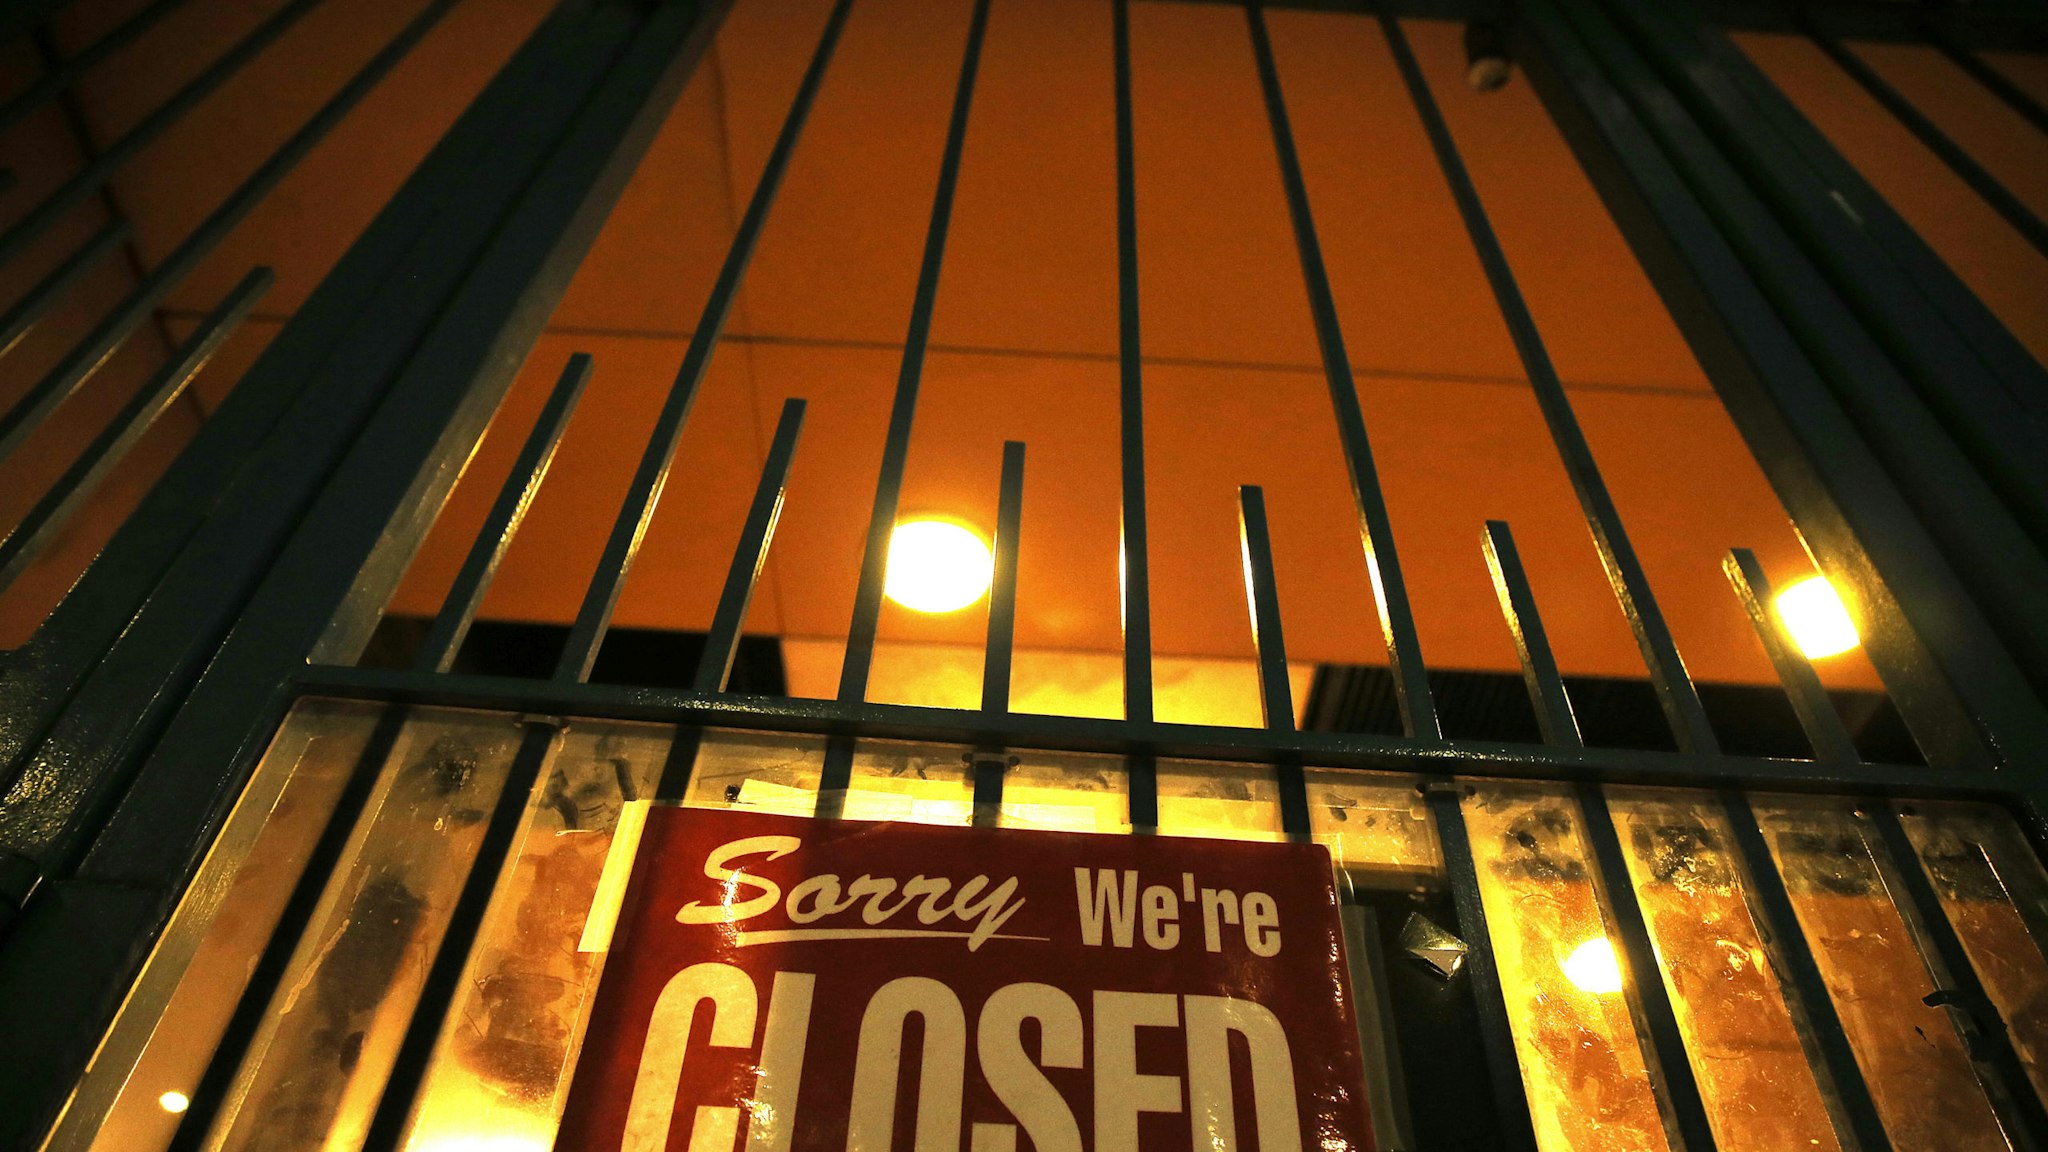 NEW YORK, NY - APRIL 05: A gate is shown closed at Grand Central Terminal amid the coronavirus pandemic on April 5, 2020 in New York City. COVID-19 has spread to most countries around the world, claiming nearly 70,000 lives with infections nearing 1.3 million people. (Photo by John Lamparski/Getty Images)